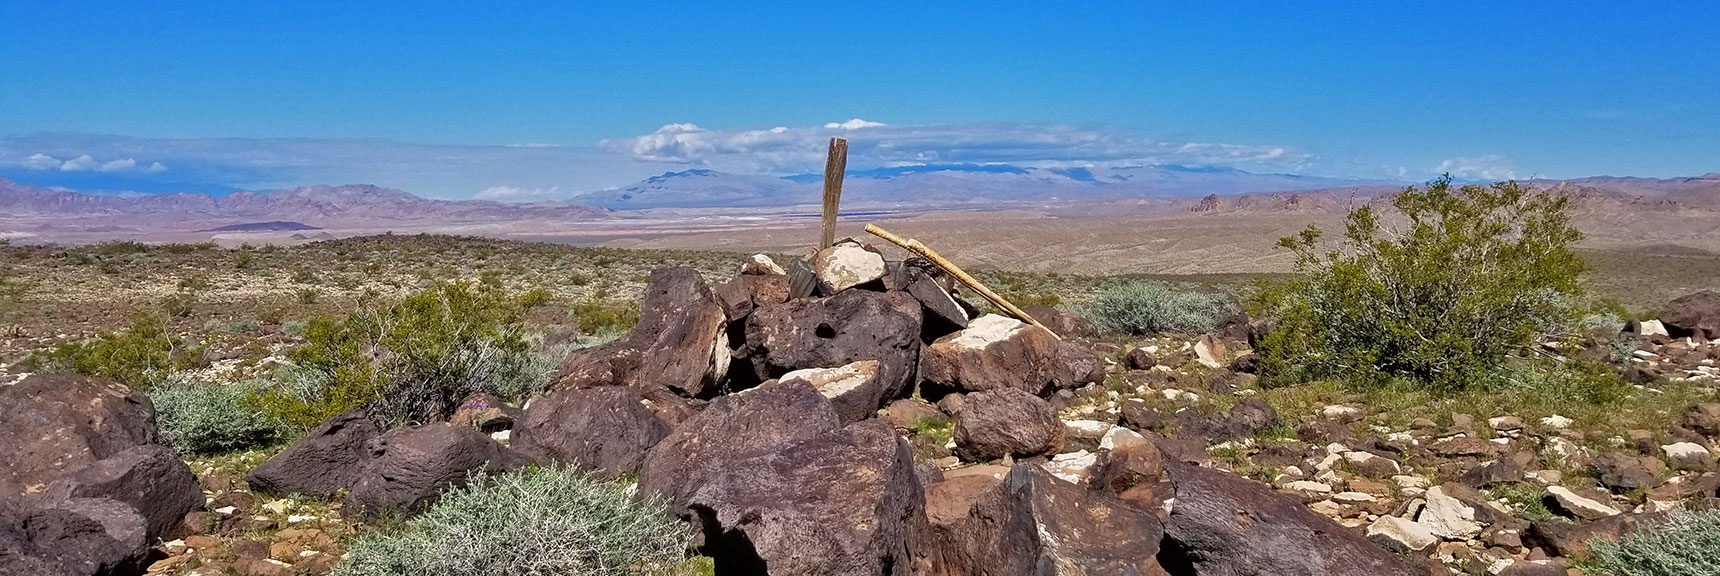 View Toward Gass Peak from Black Mesa in Lake Mead National Recreation Area, Nevada